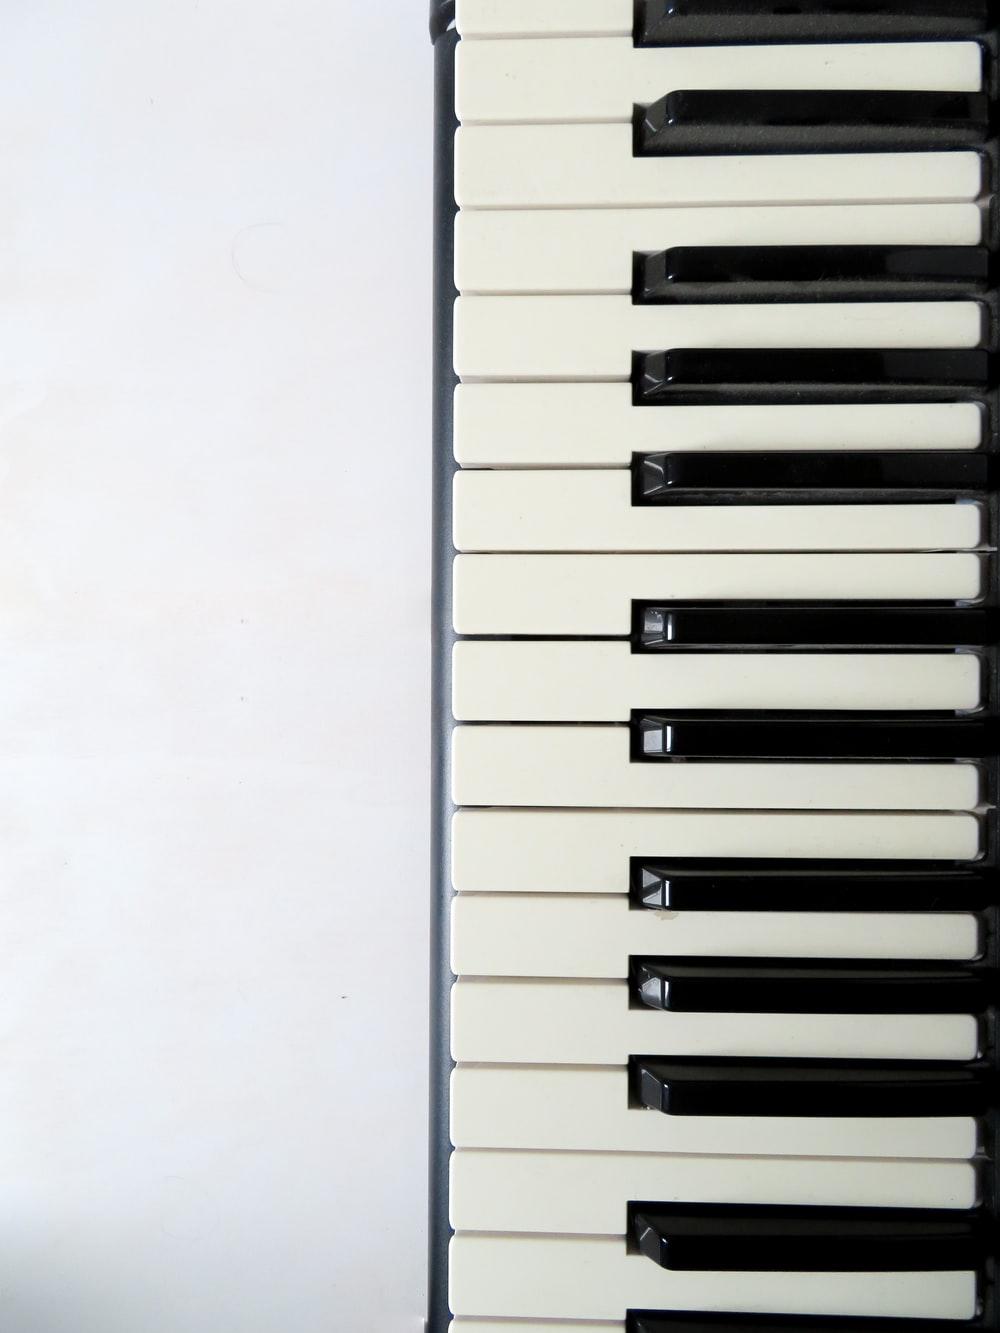 Piano Picture. Download Free Image